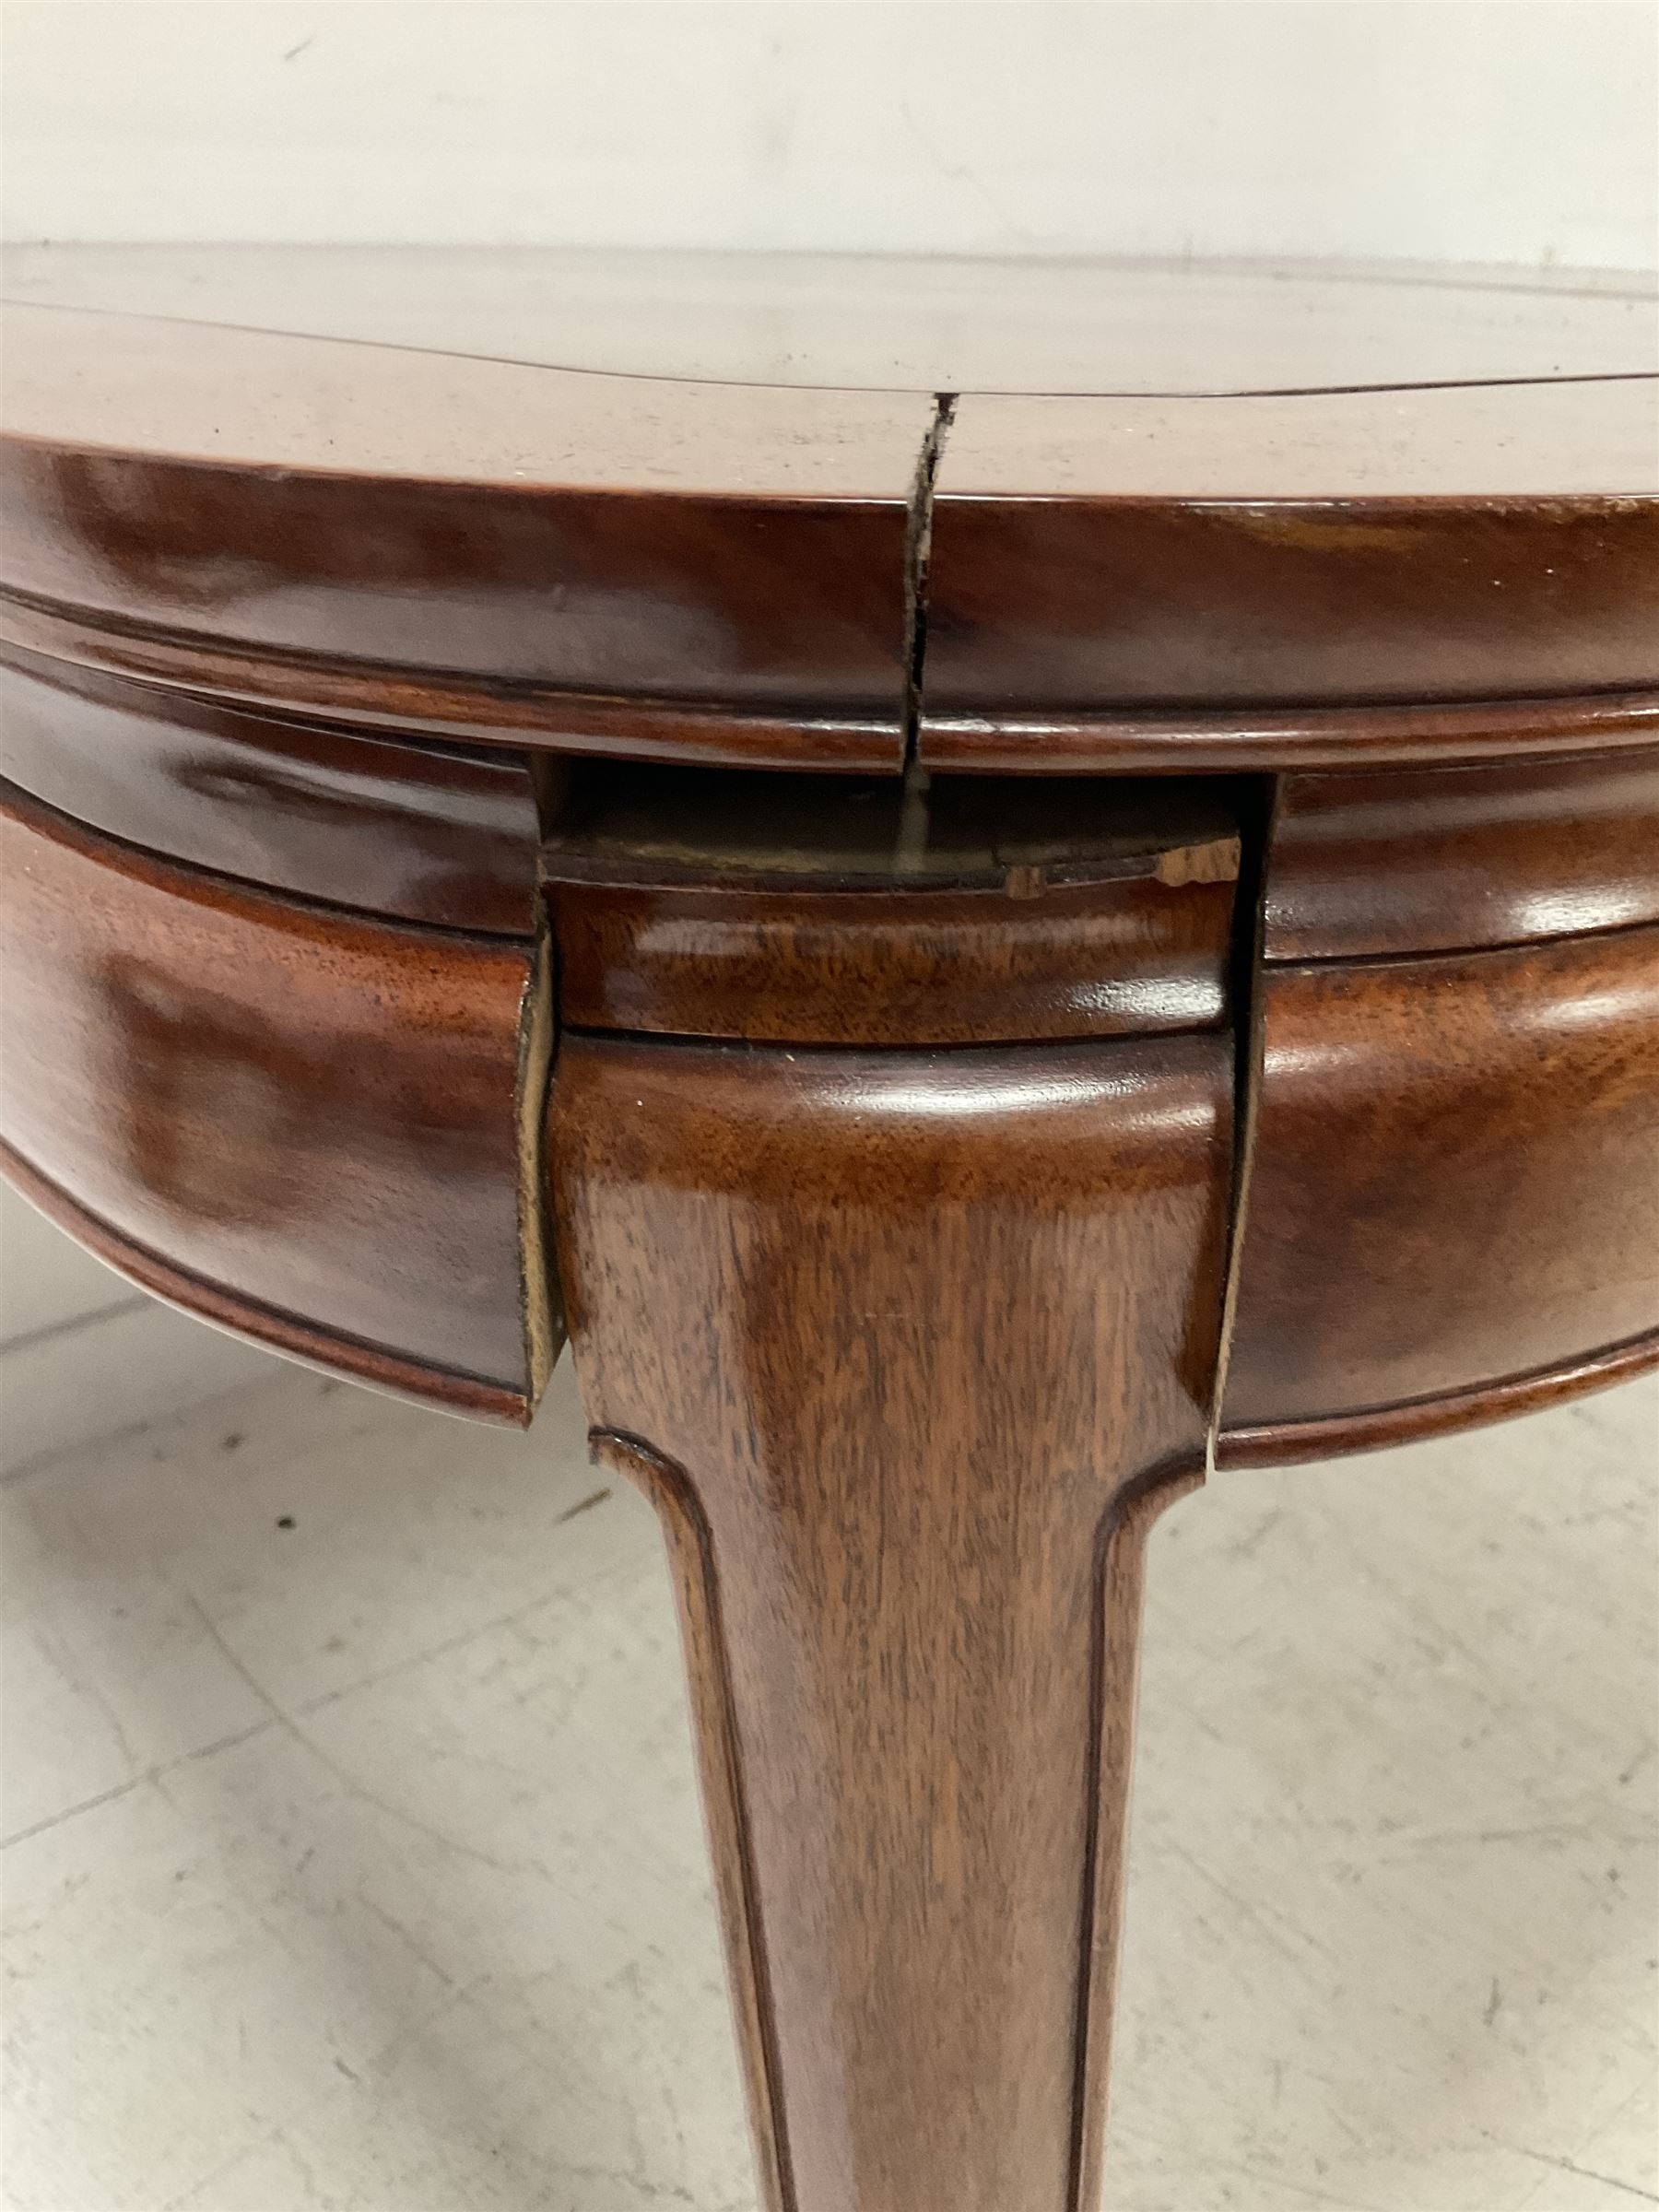 Contemporary Chinese rosewood extending dining table - Image 5 of 6